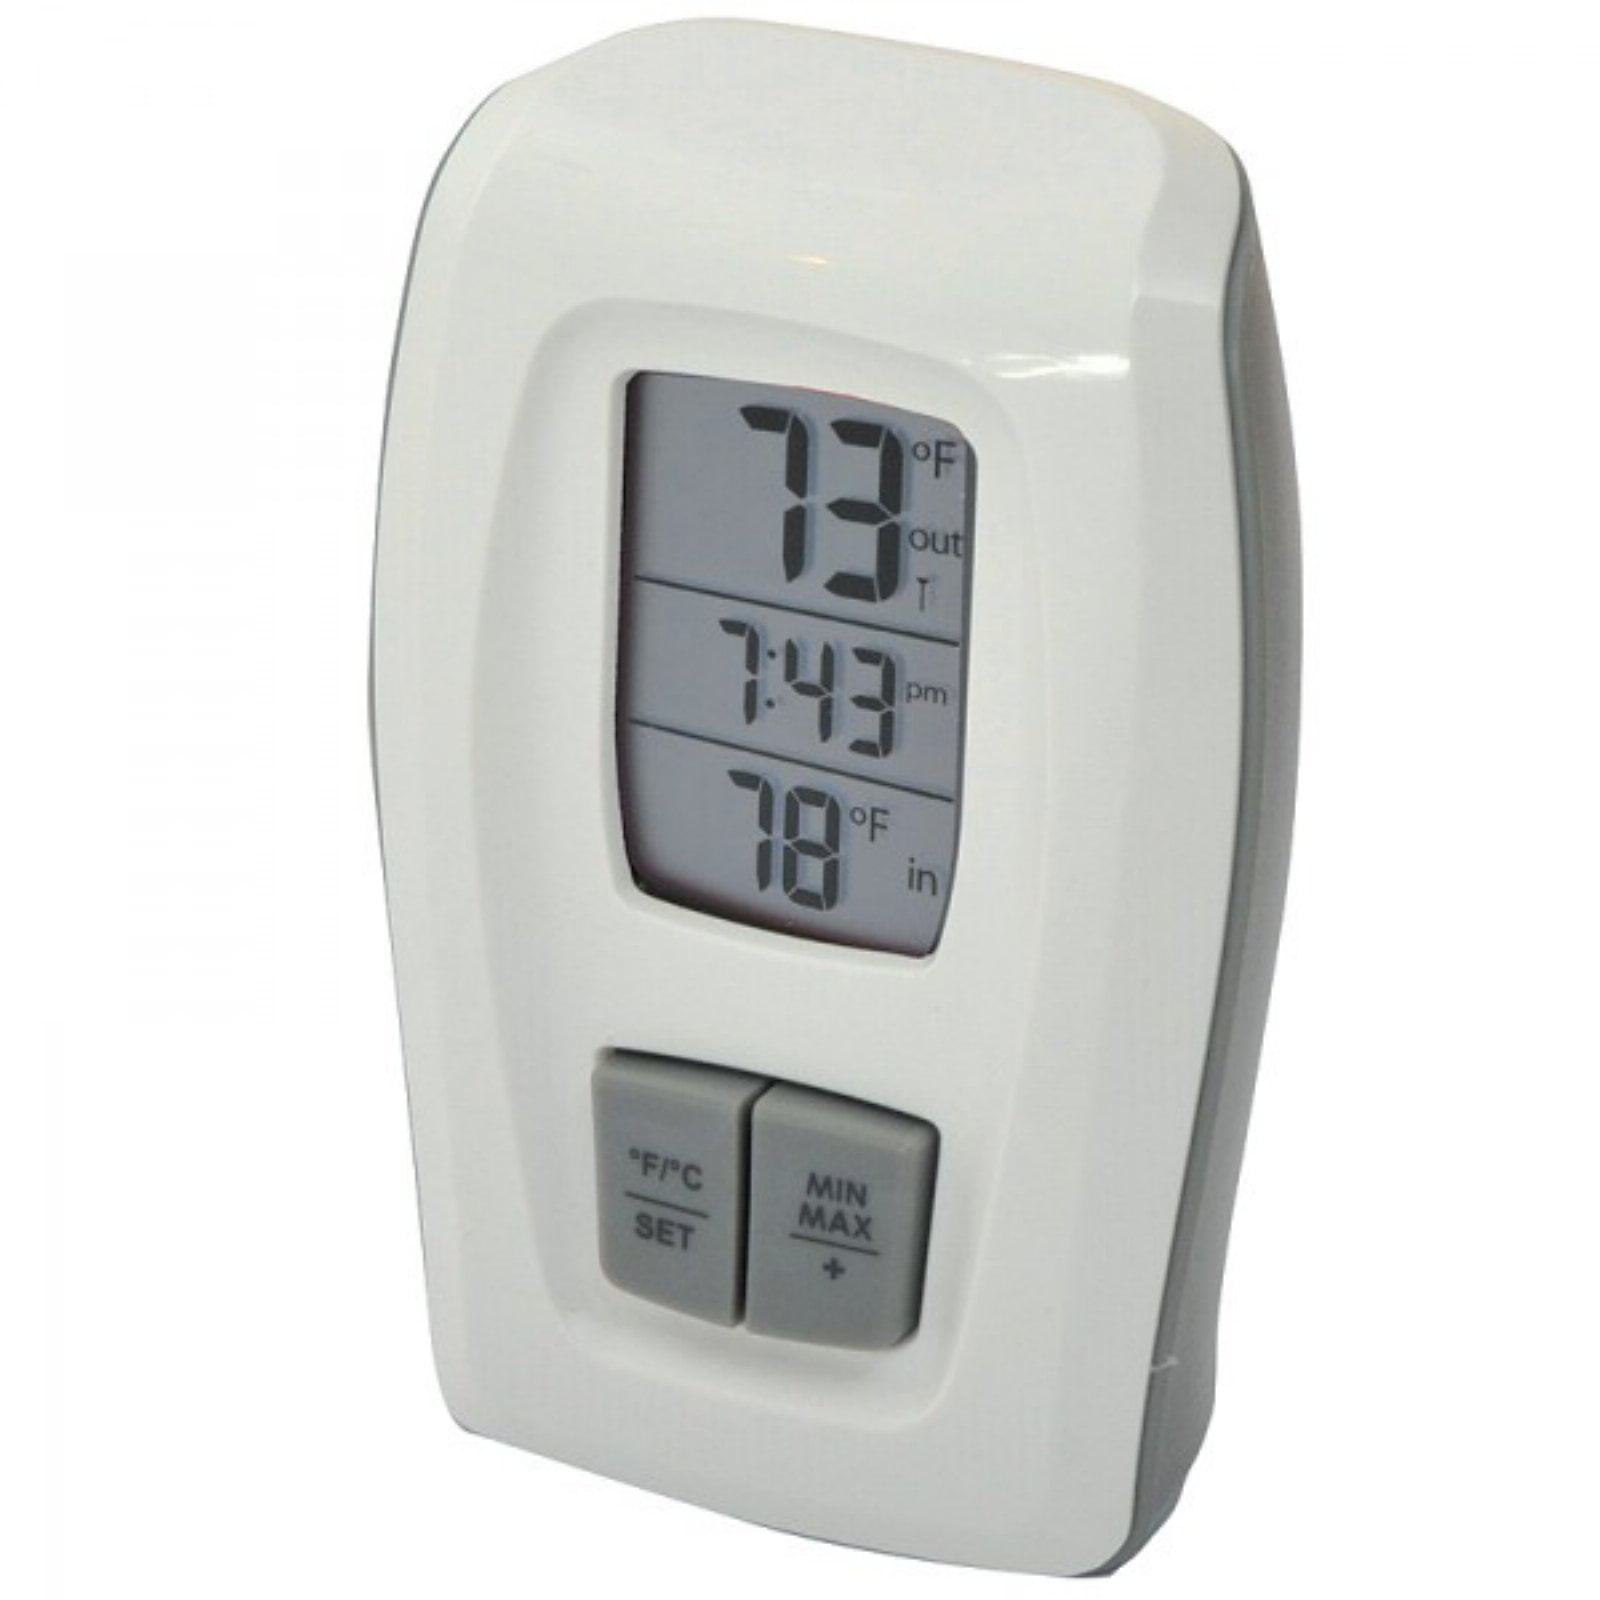 Buy AcuRite Indoor/Outdoor Thermometer with Wired Sensor online